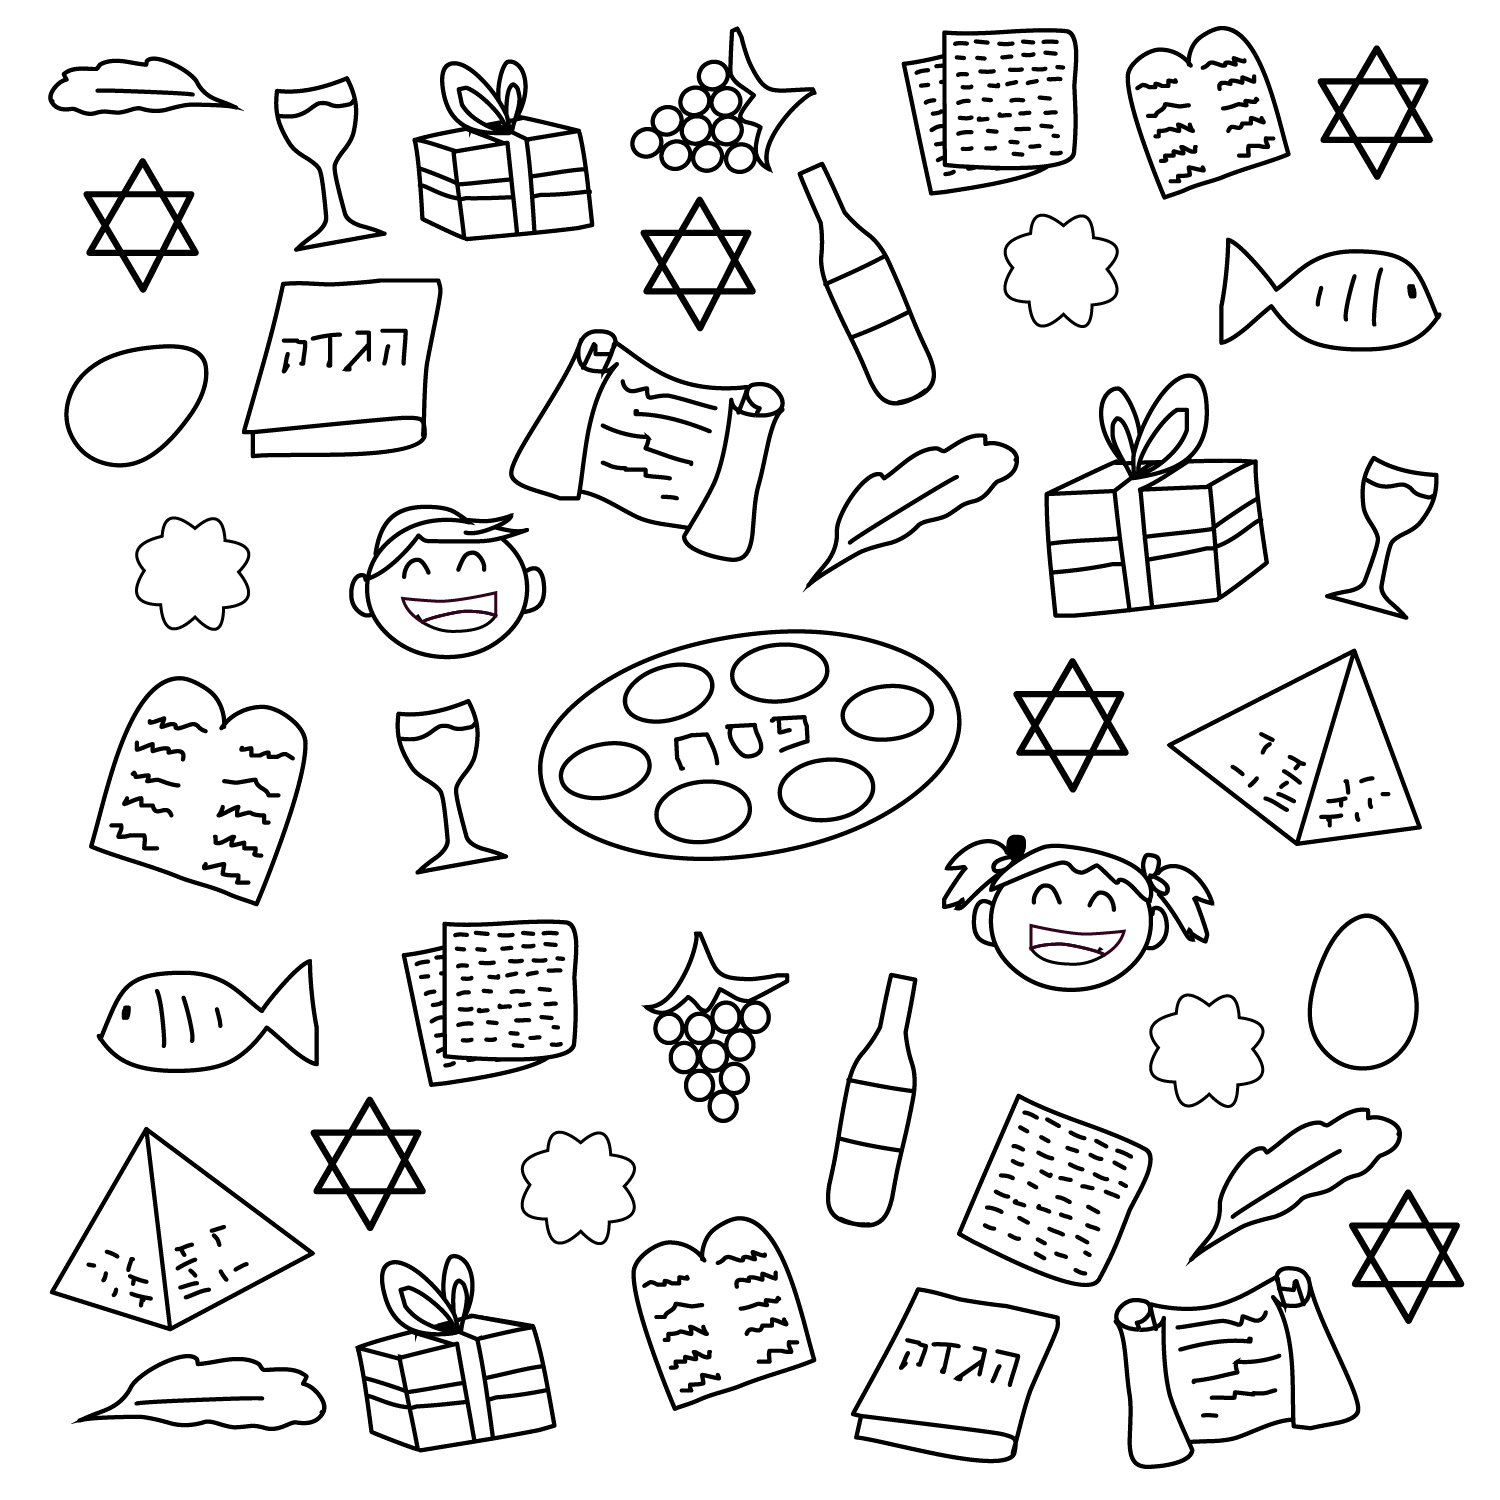 Passover Coloring Page